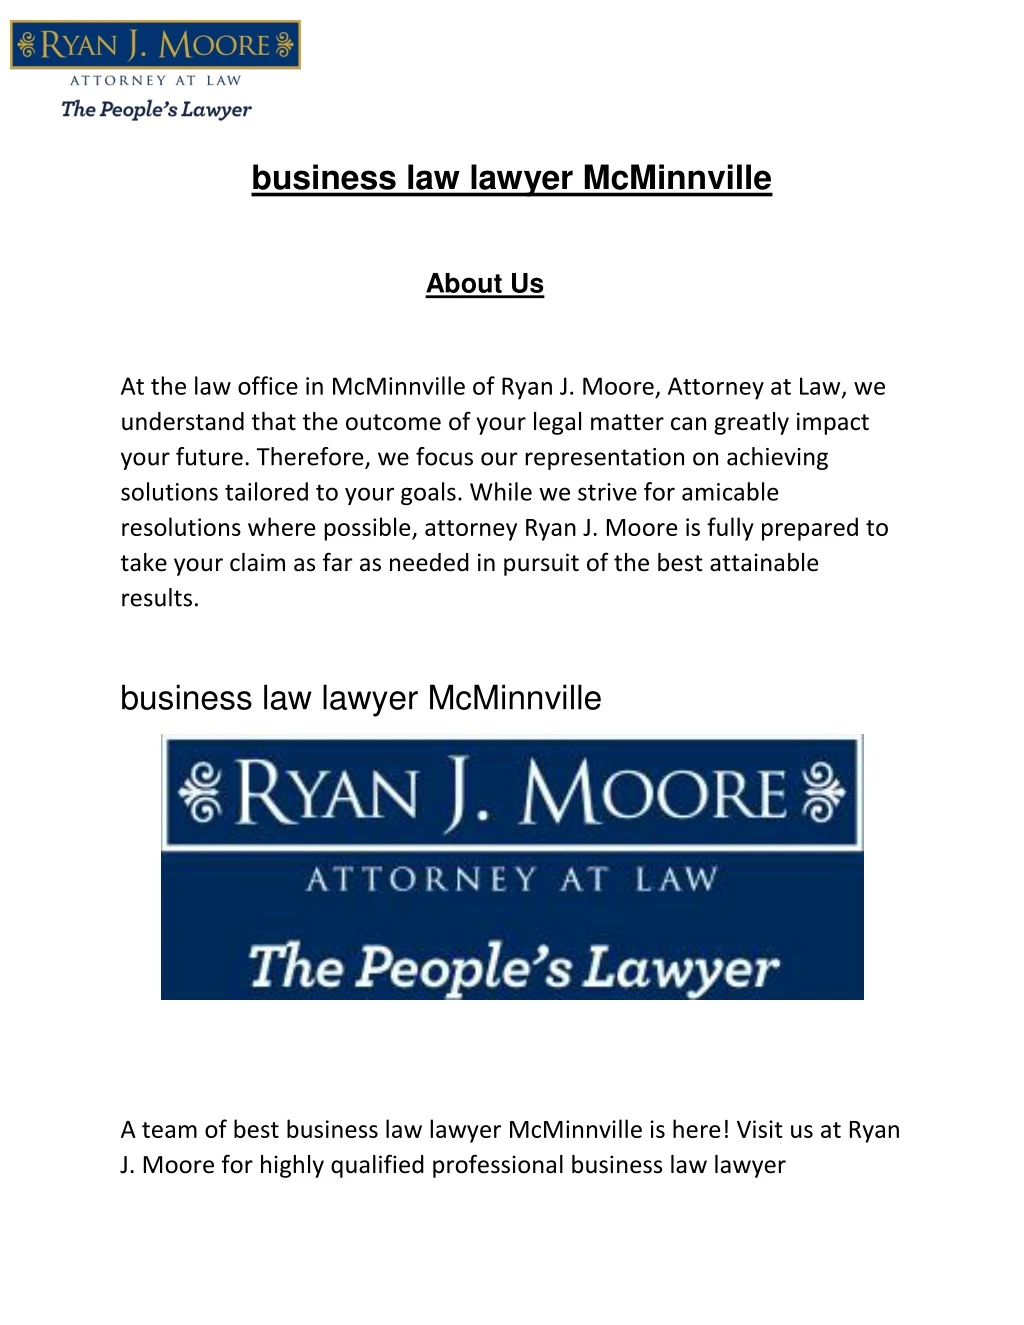 business law lawyer mcminnville